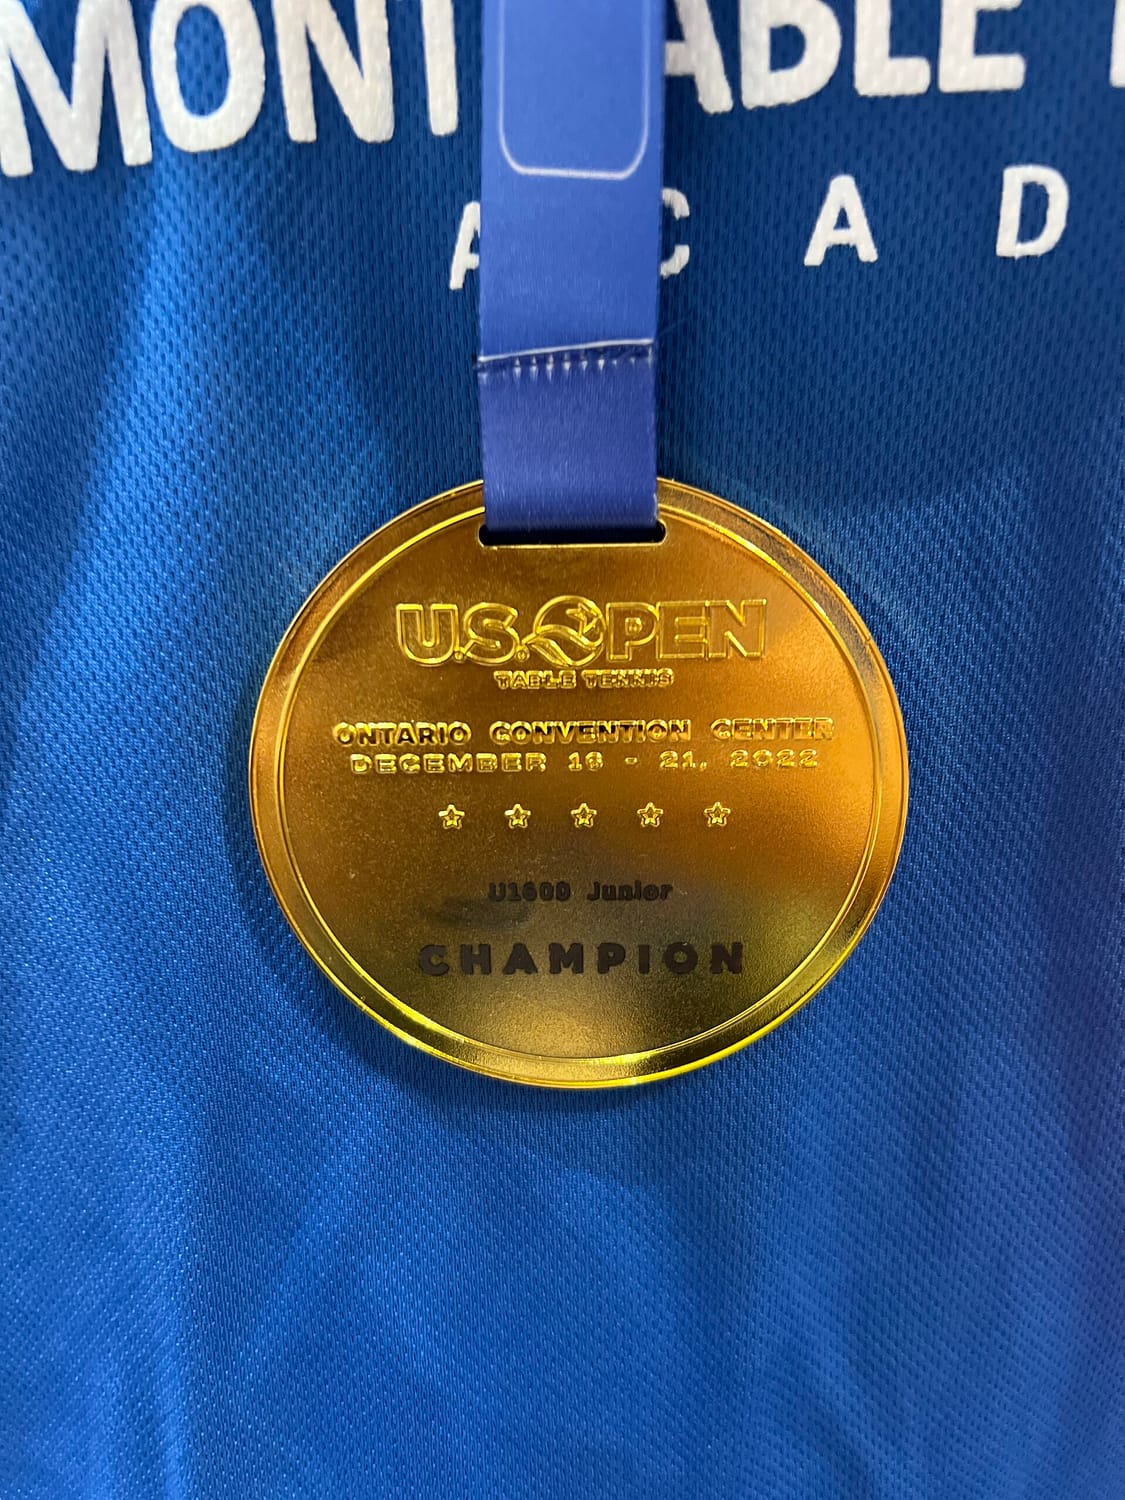 Gold Medal for Under 1600 at the 2022 US Open!